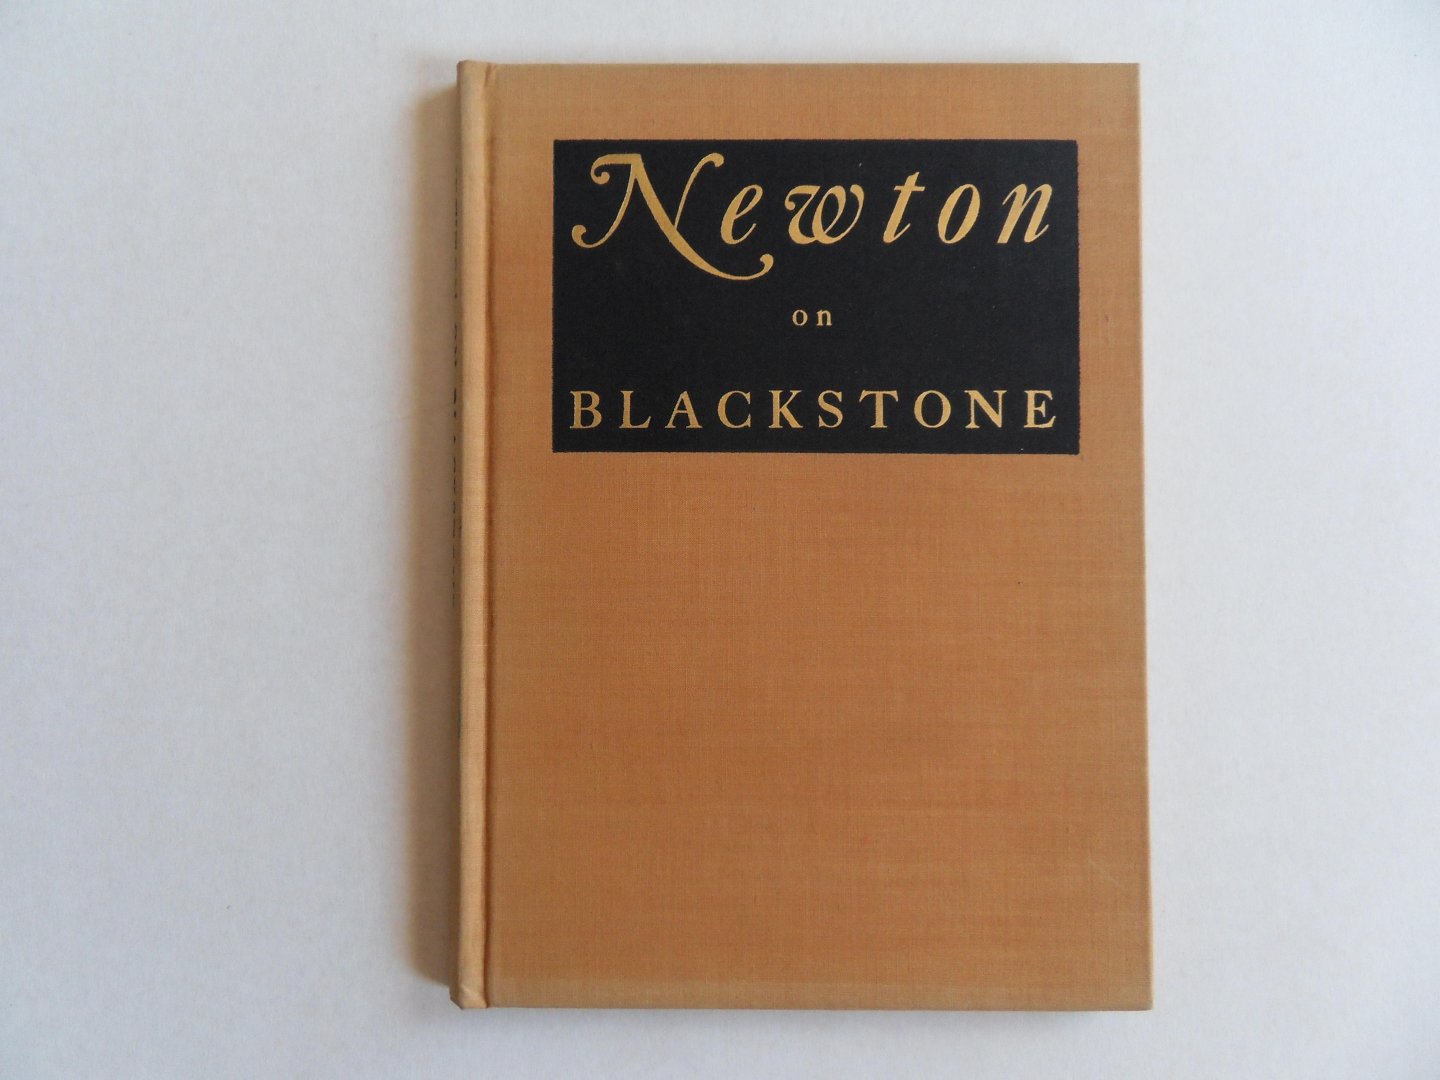 Newton, A. Edward. [ SIGNED by the author under the colophon ]. - Newton on Blackstone. [ only printed once in 2000 copies - numbered 1515 ].